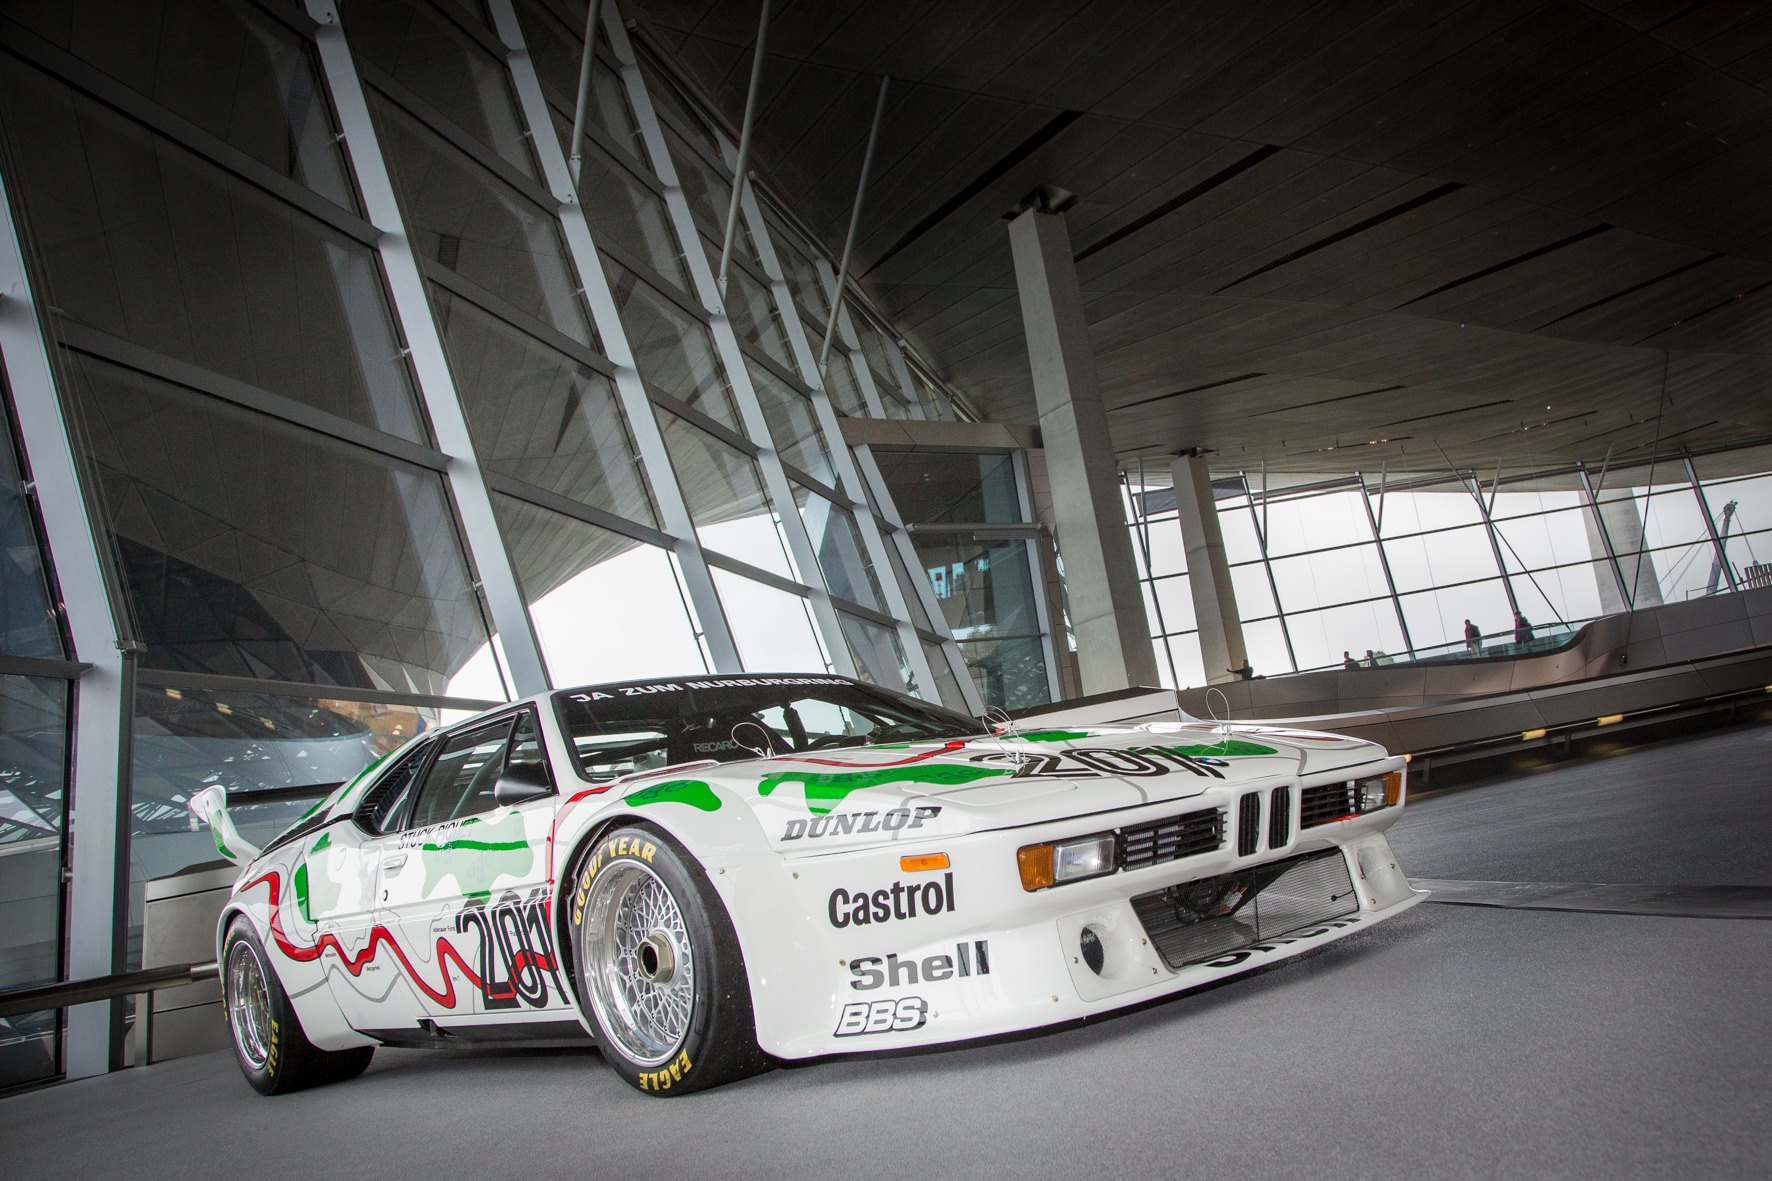 The BMW M1 Procar “Yes to the Nürburgring”